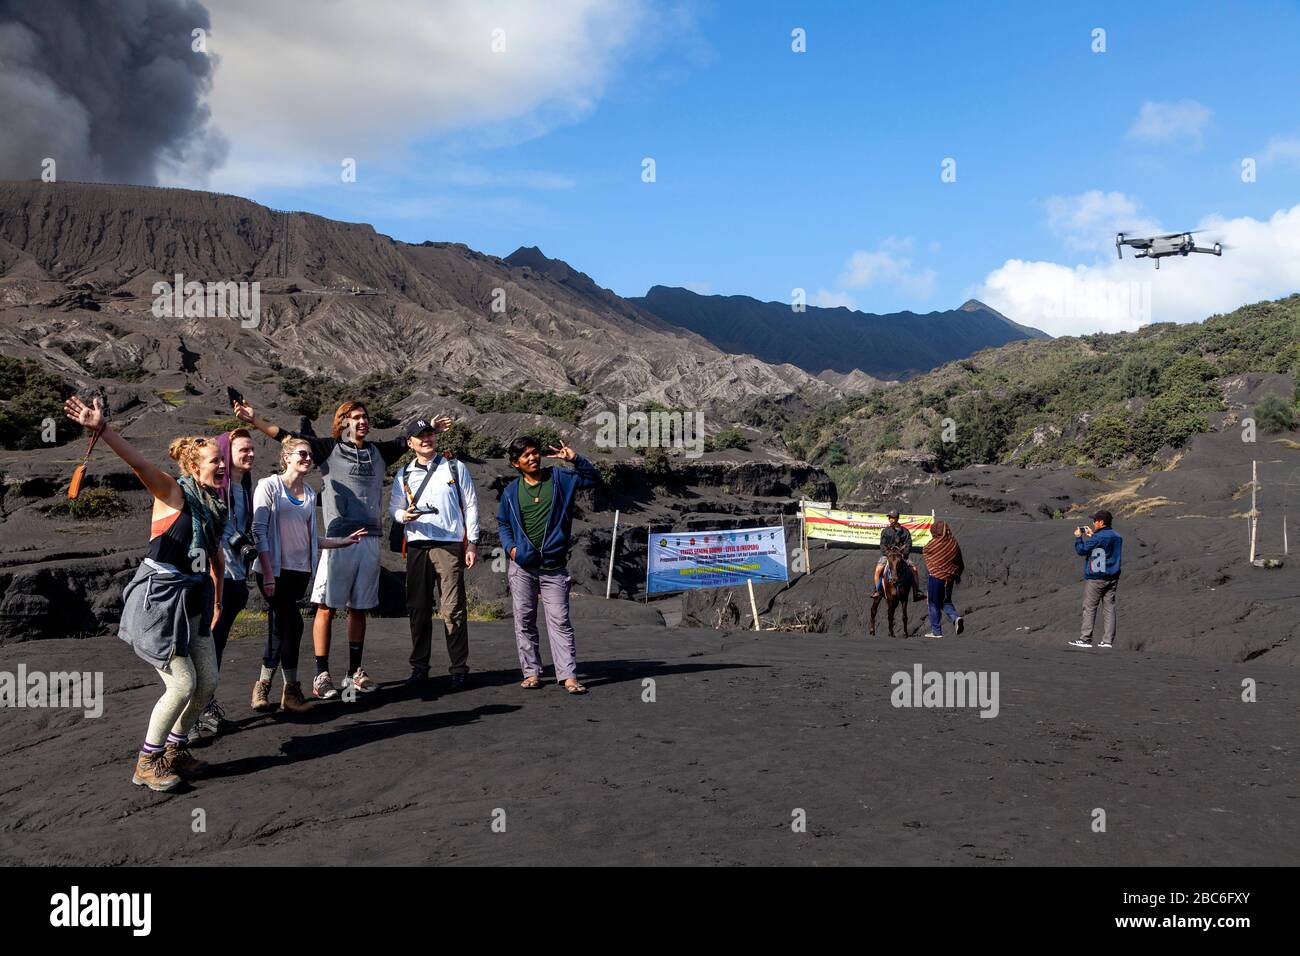 Tourists Pose For A Drone Selfie On The Sea Of Sand, In The Backround Is An Erupting Mount Bromo, Bromo Tengger Semeru National Park, Java, Indonesia Stock Photo